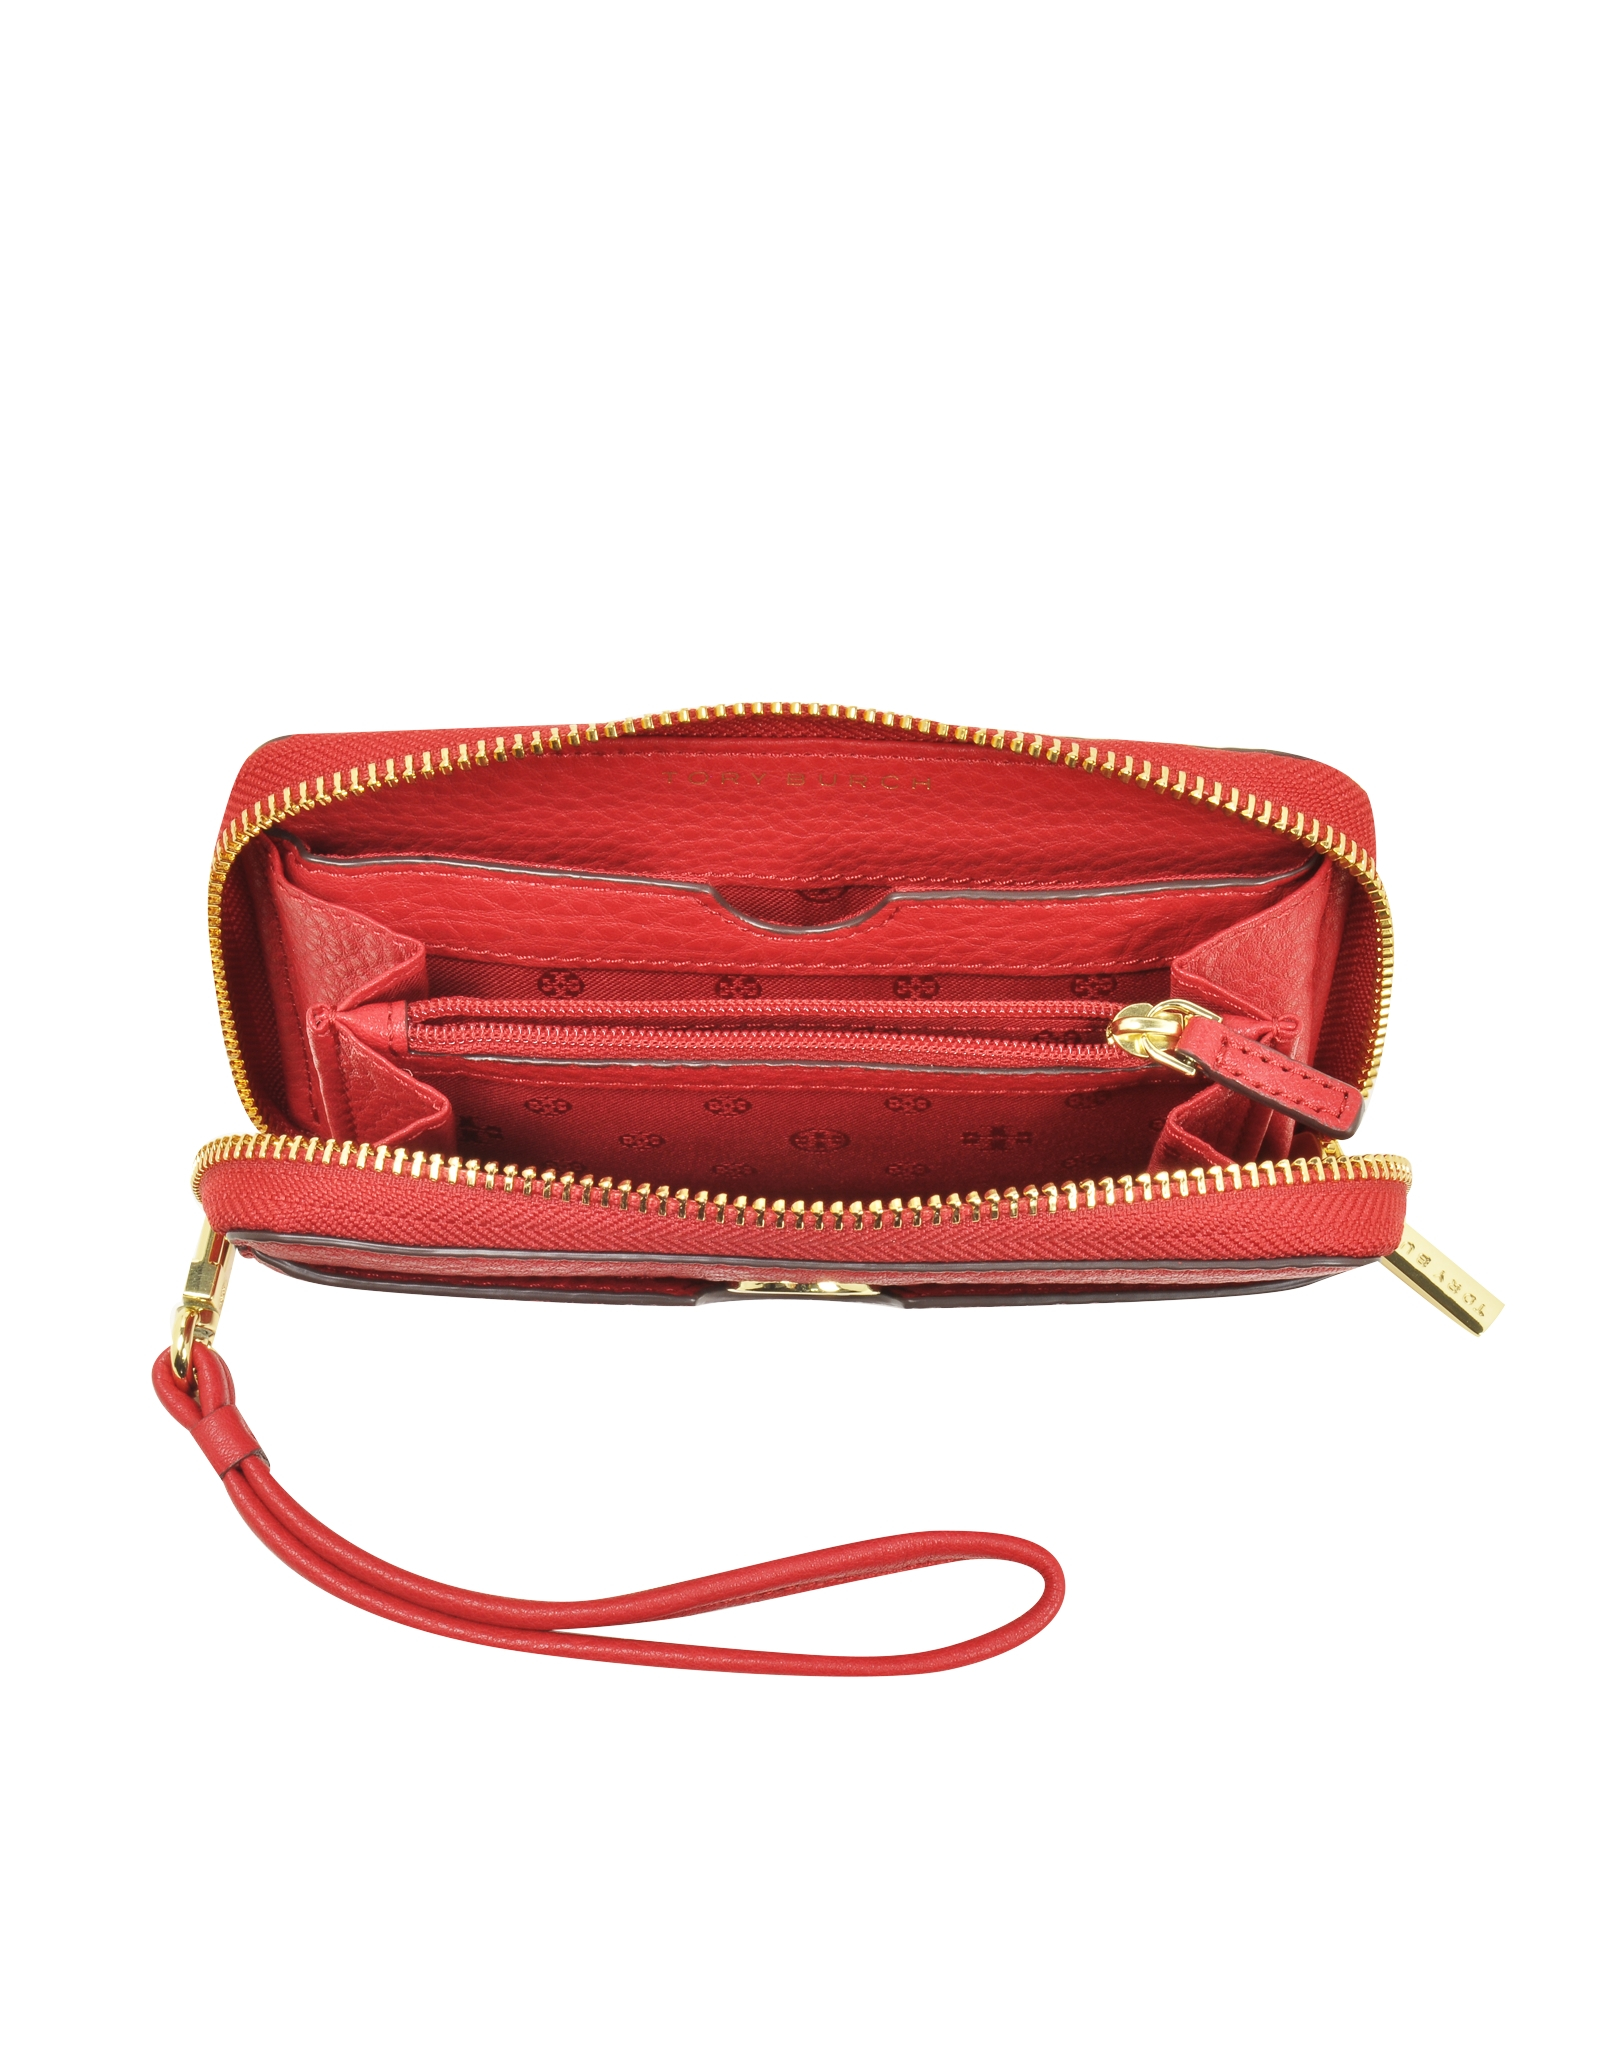 Tory Burch Robinson Pebbled Smartphone Wristlet Wallet Clutch in Red - Lyst